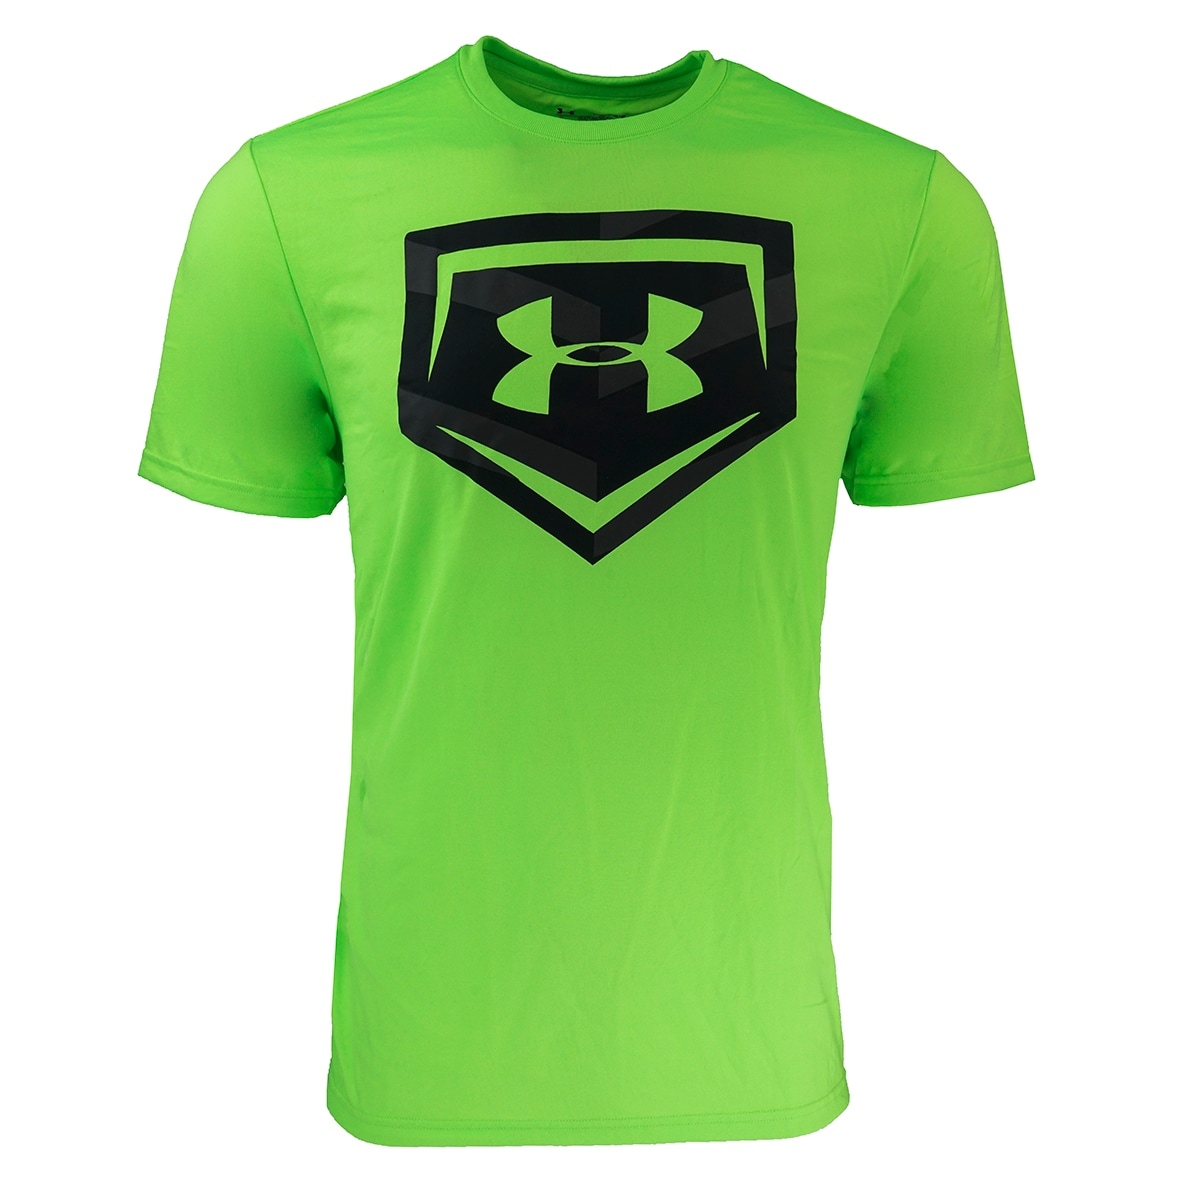 lime green under armour shirt